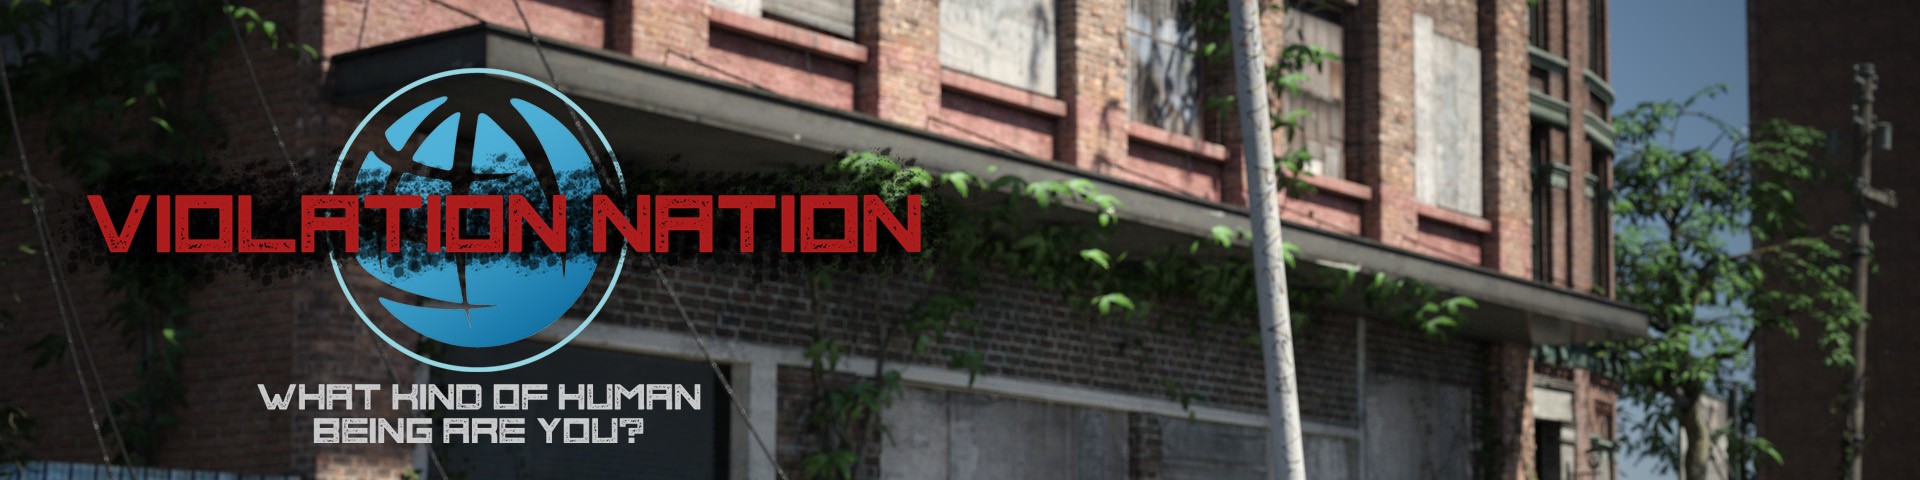 Violation Nation Adult Game Android Apk Download (1)